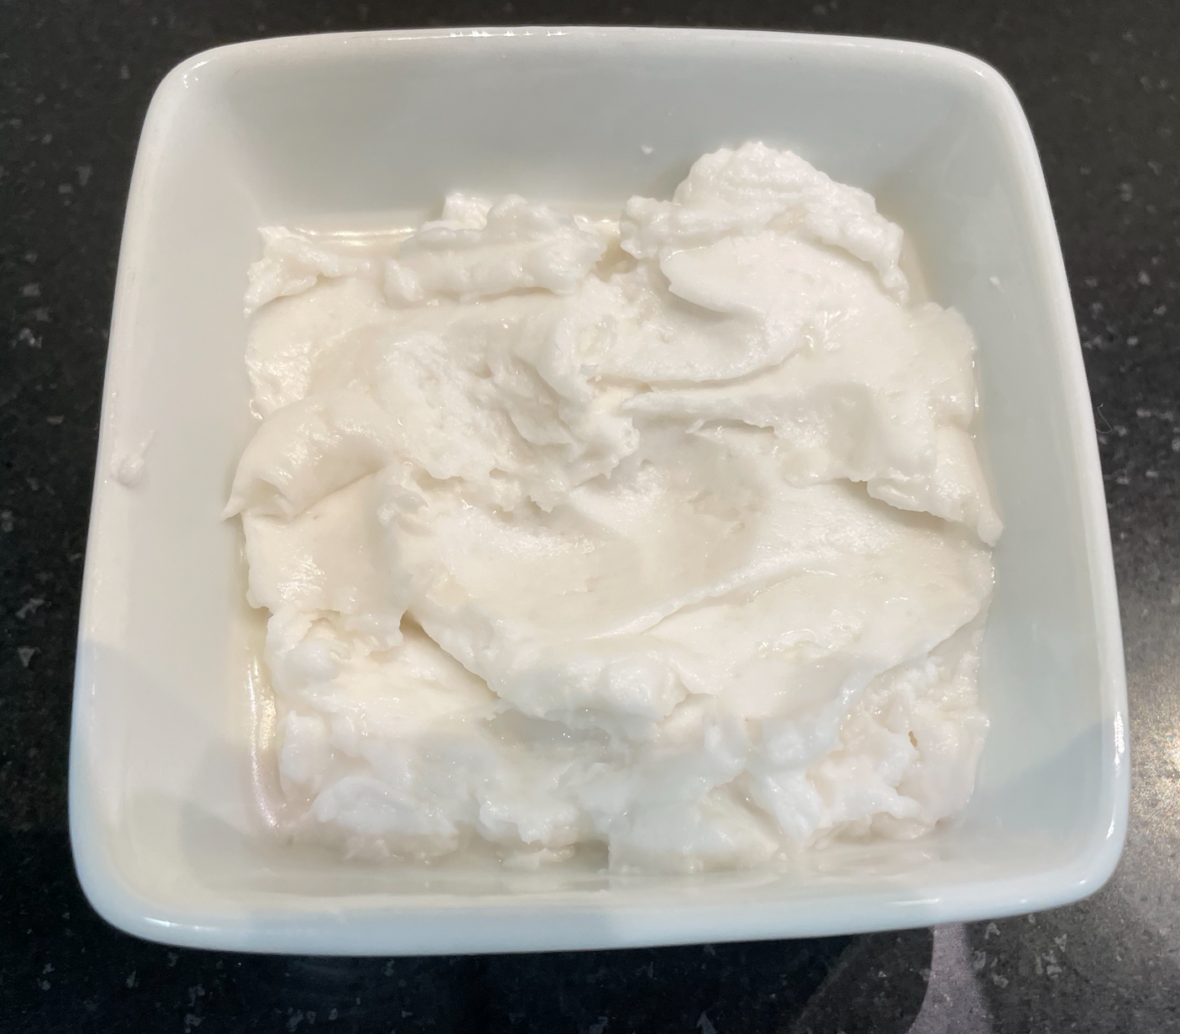 How to Make Whipped Cream Without Heavy Cream